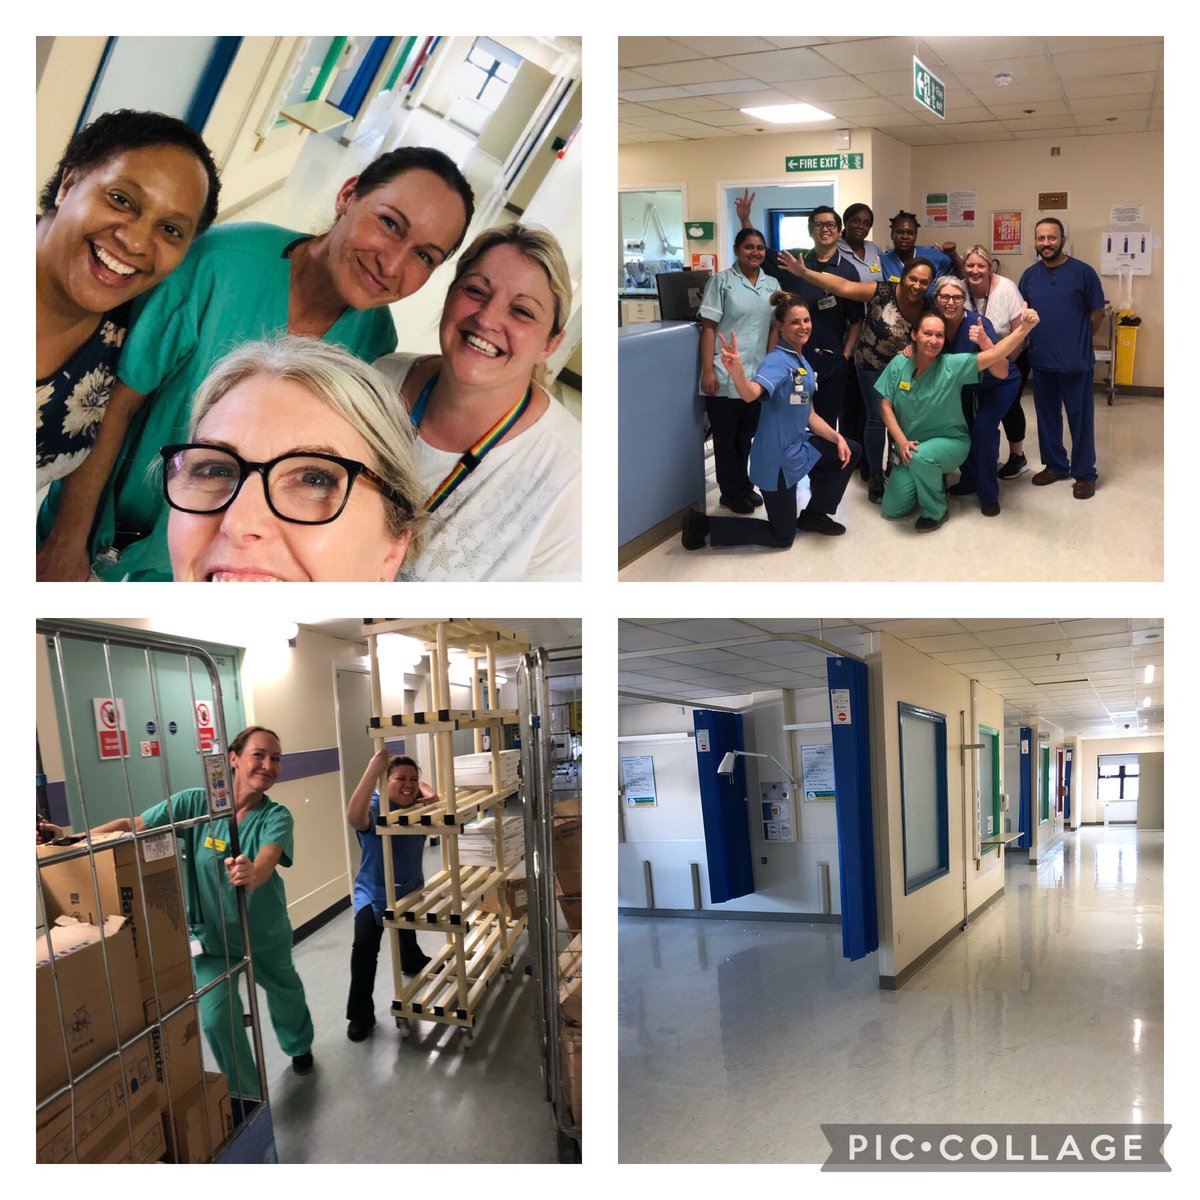 Moving Day ! To support the elective surgical hub expansion, Iris ward moved to Erica . 🏠. Massive thank you to everybody involved ⭐️⭐️👏👏@martina5979 @MrSeanMGreene84 @joycehartzenbe1 @DivNhs @BHRUTEandFteam @mitie @elsbels44 @carolwaters2011